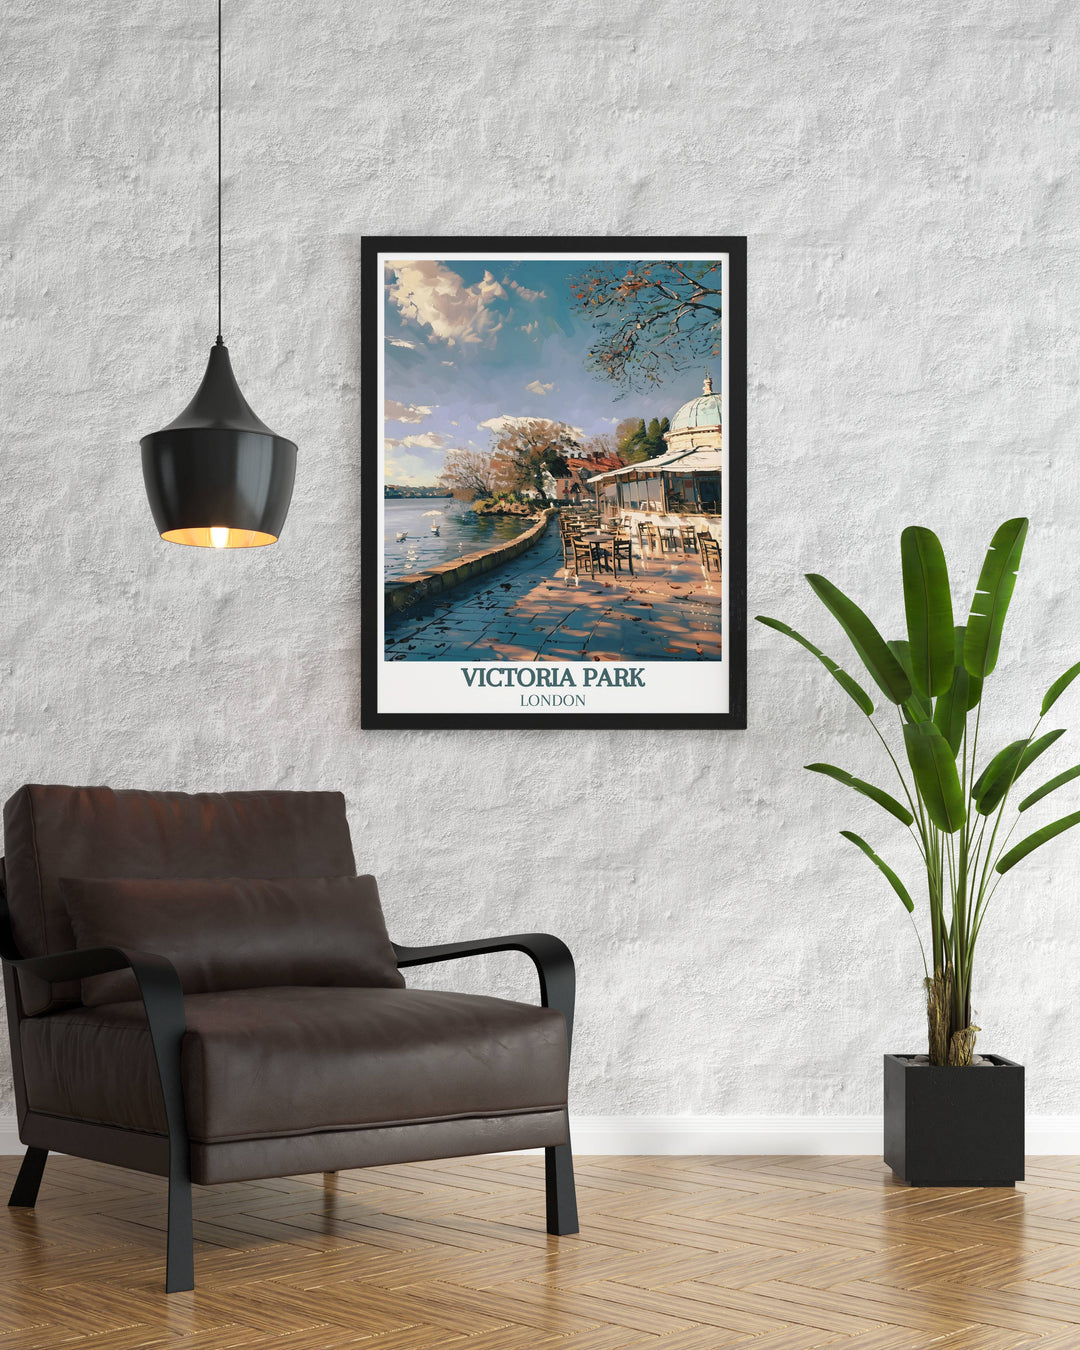 The Pavilion Café framed print showcasing the serene ambiance and natural beauty of Victoria Park a perfect addition to any home decor.